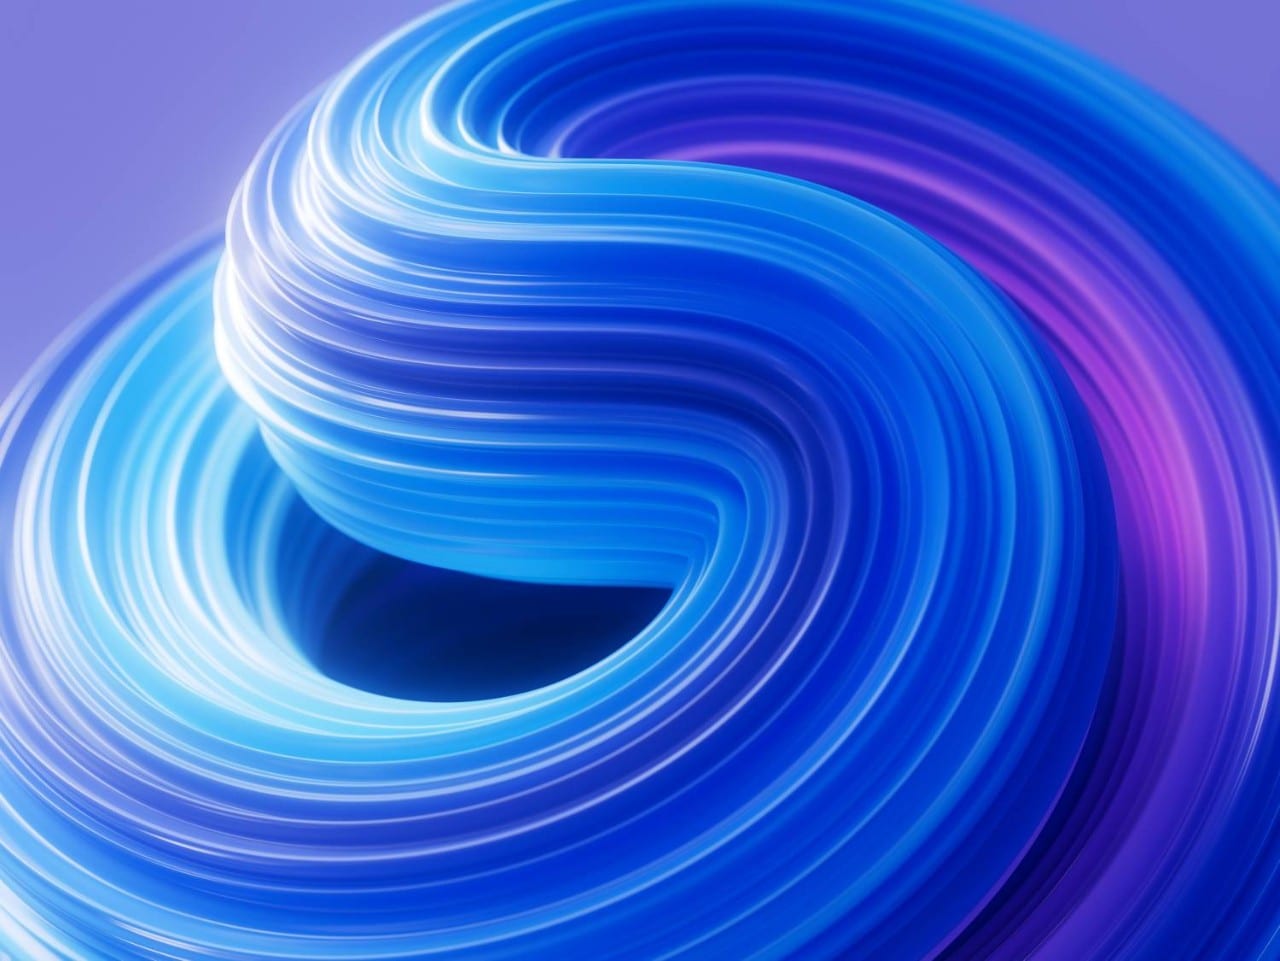 Abstract blue and purple swirls